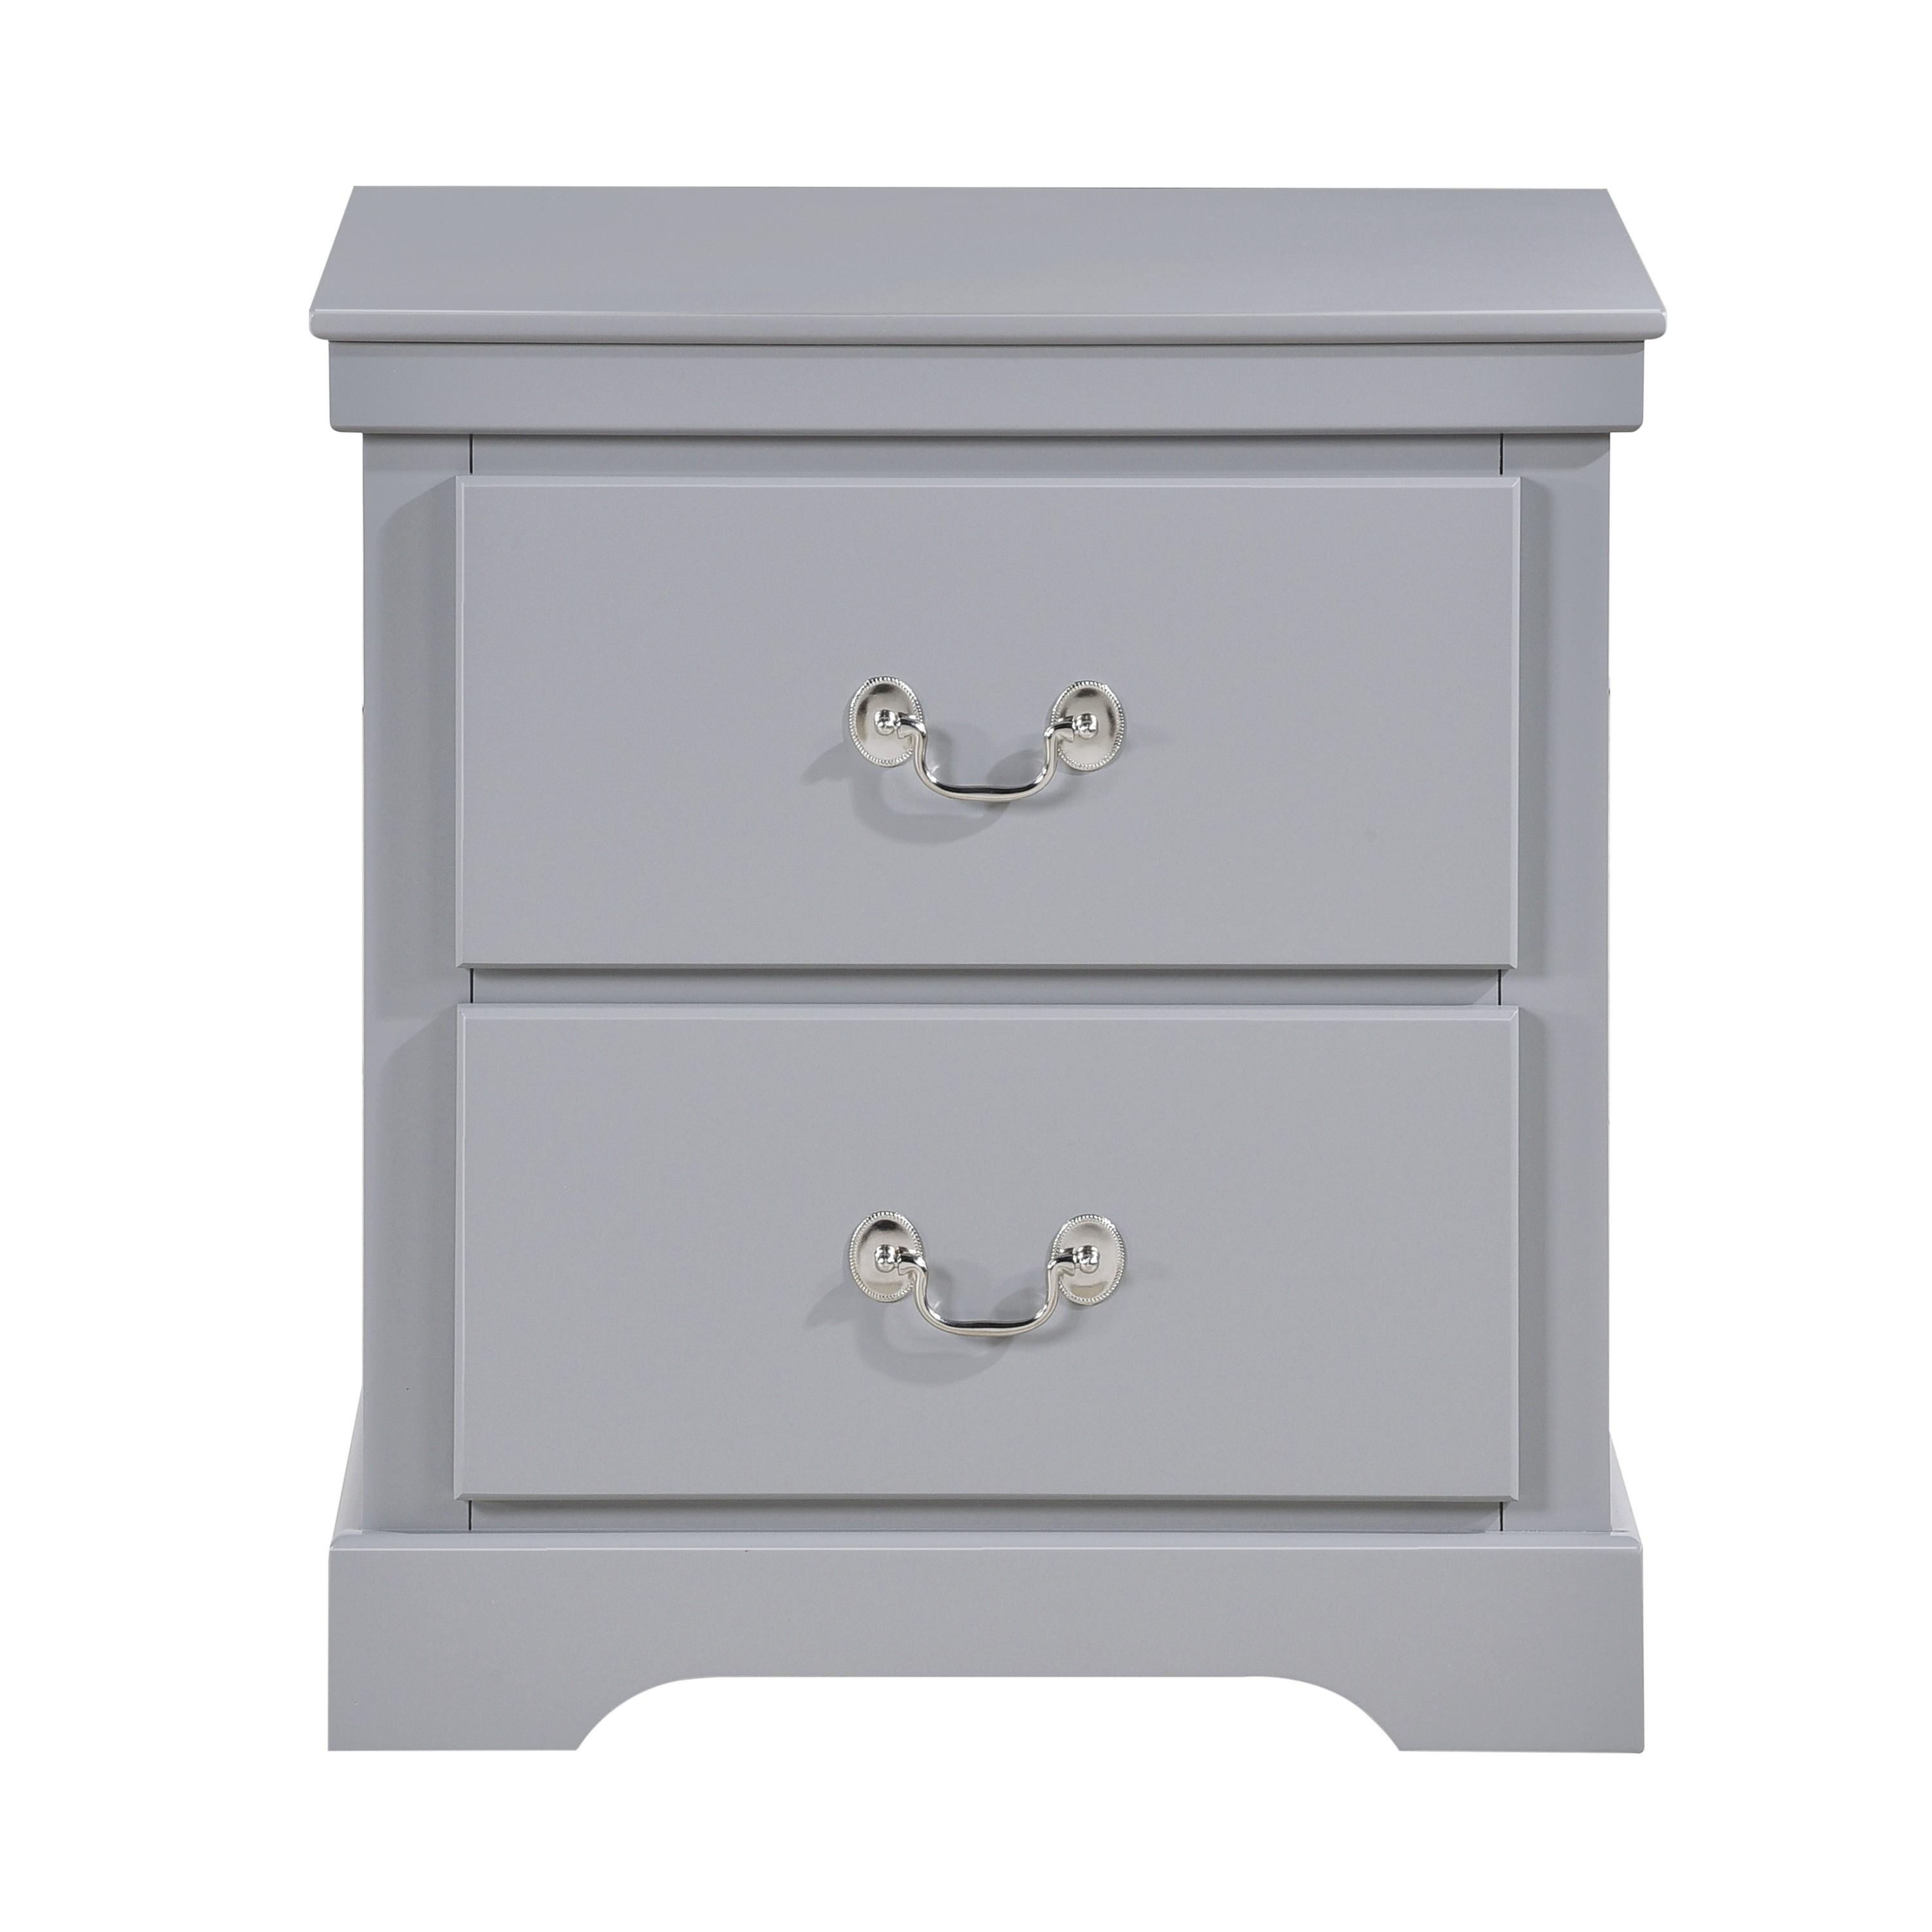 

    
Homelegance 1519GY-4 Seabright Nightstand Gray 1519GY-4
